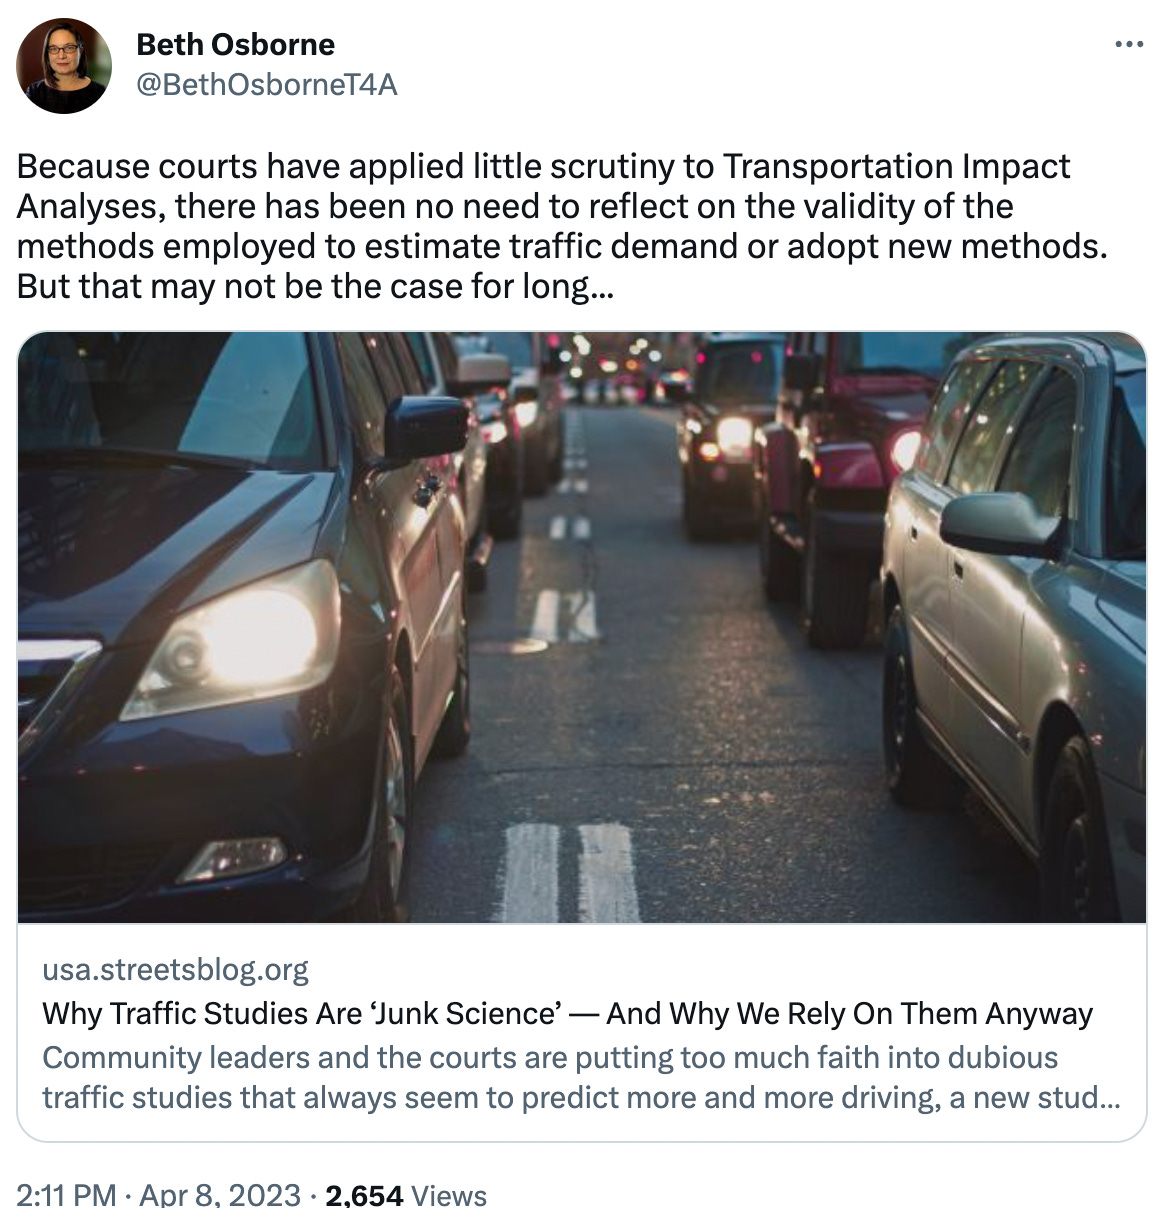 Because courts have applied little scrutiny to Transportation Impact Analyses, there has been no need to reflect on the validity of the methods employed to estimate traffic demand or adopt new methods. But that may not be the case for long... usa.streetsblog.org Why Traffic Studies Are ‘Junk Science’ — And Why We Rely On Them Anyway Community leaders and the courts are putting too much faith into dubious traffic studies that always seem to predict more and more driving, a new study argues — but that could all change.